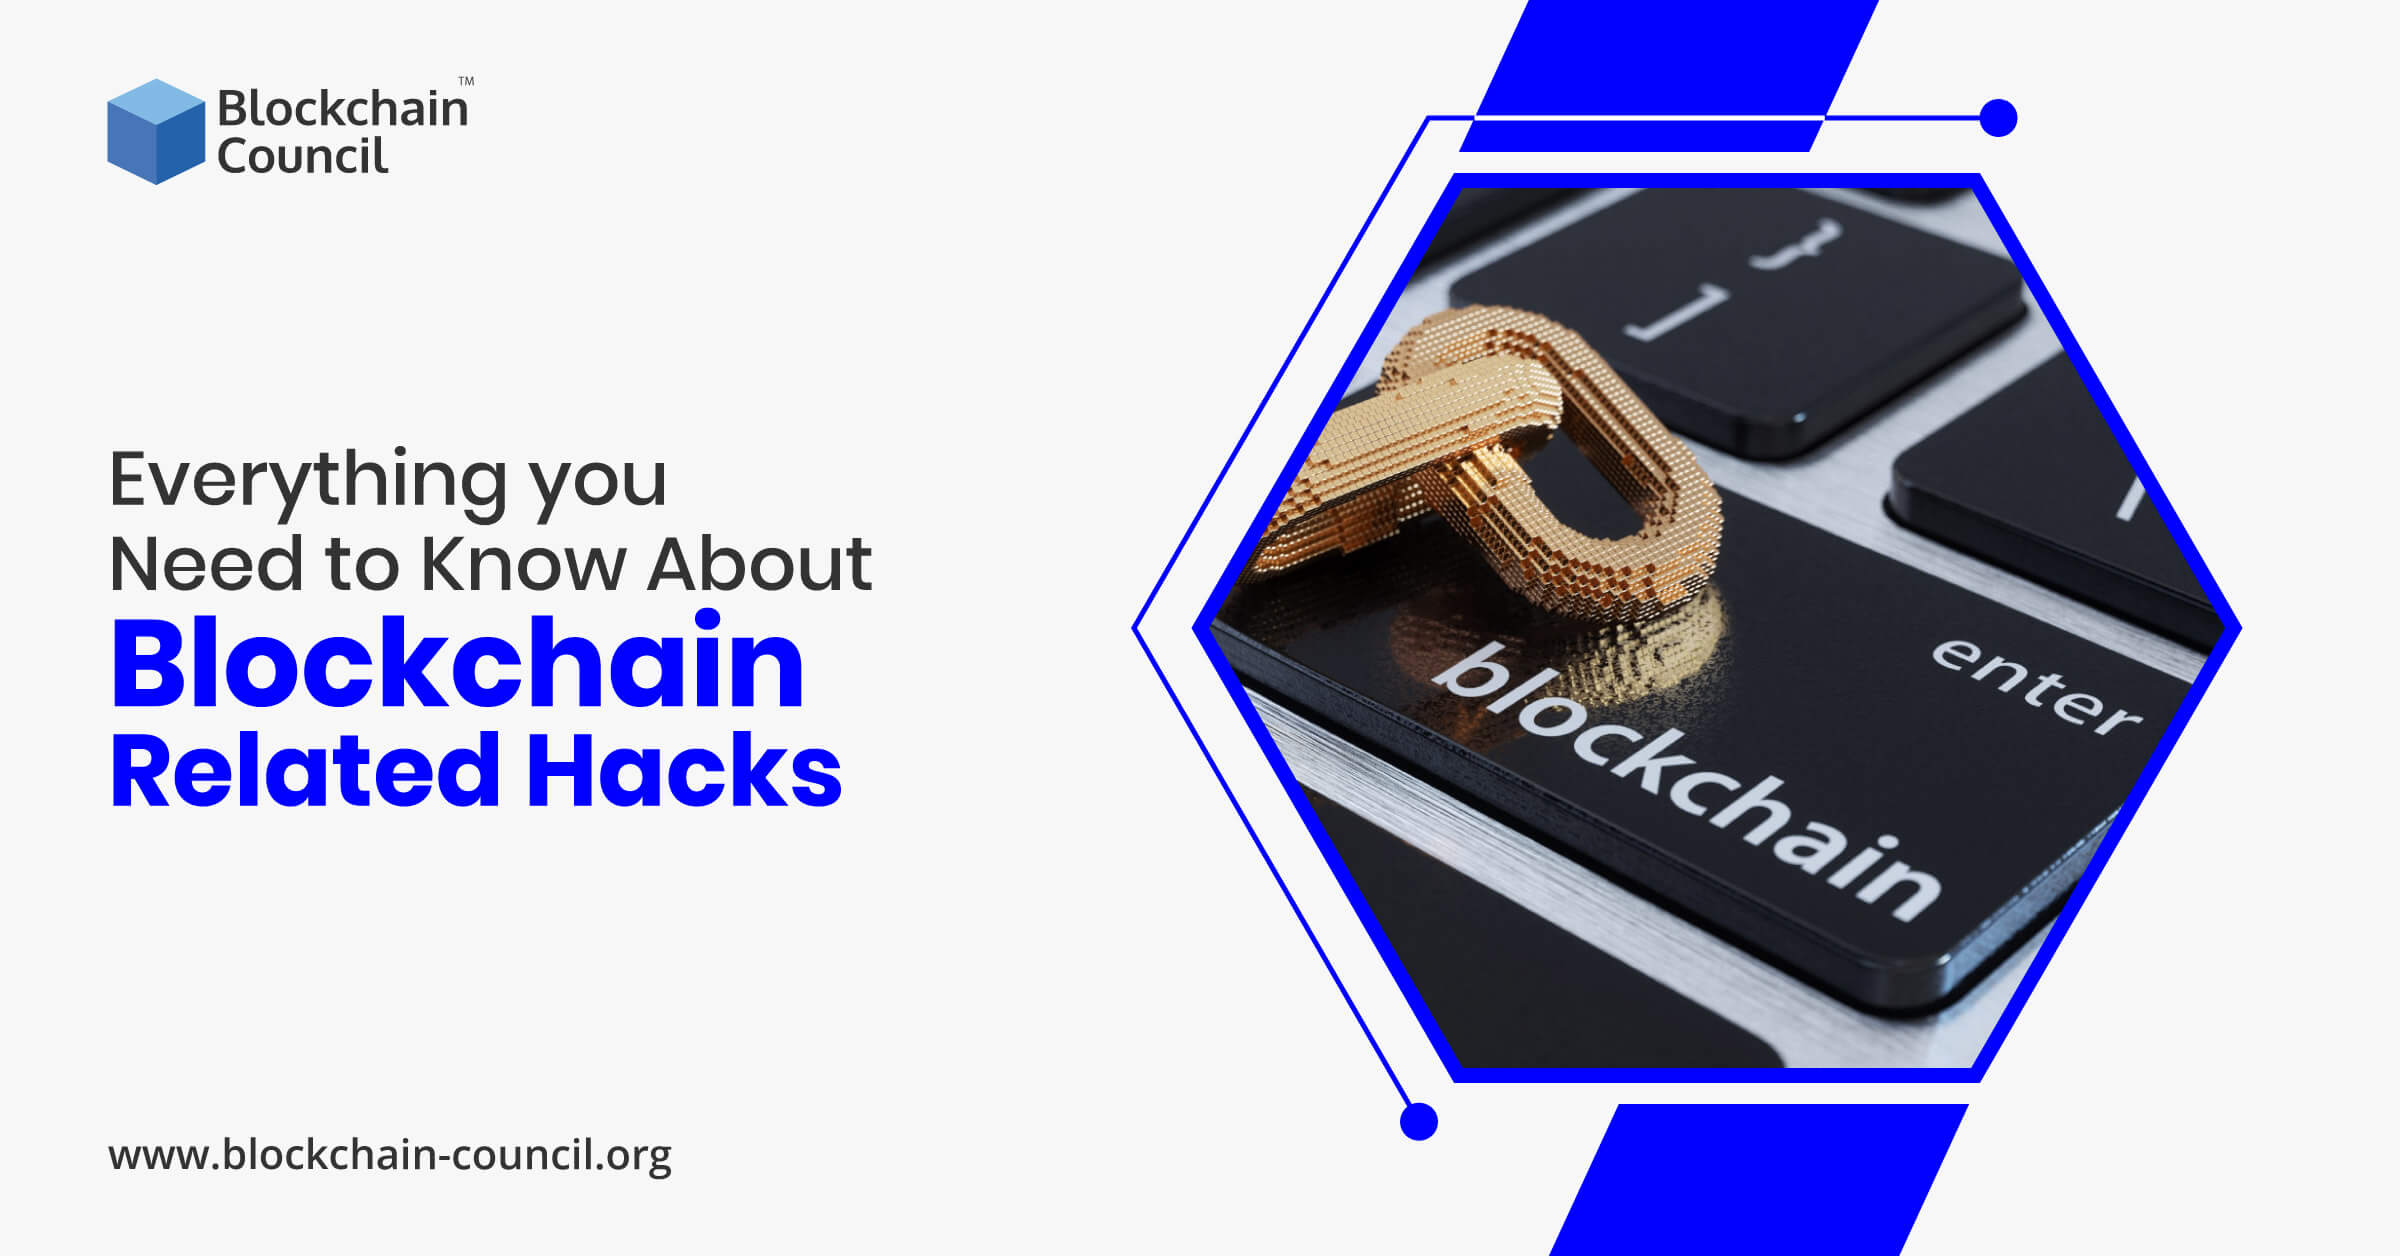 Know About Blockchain-Related Hacks